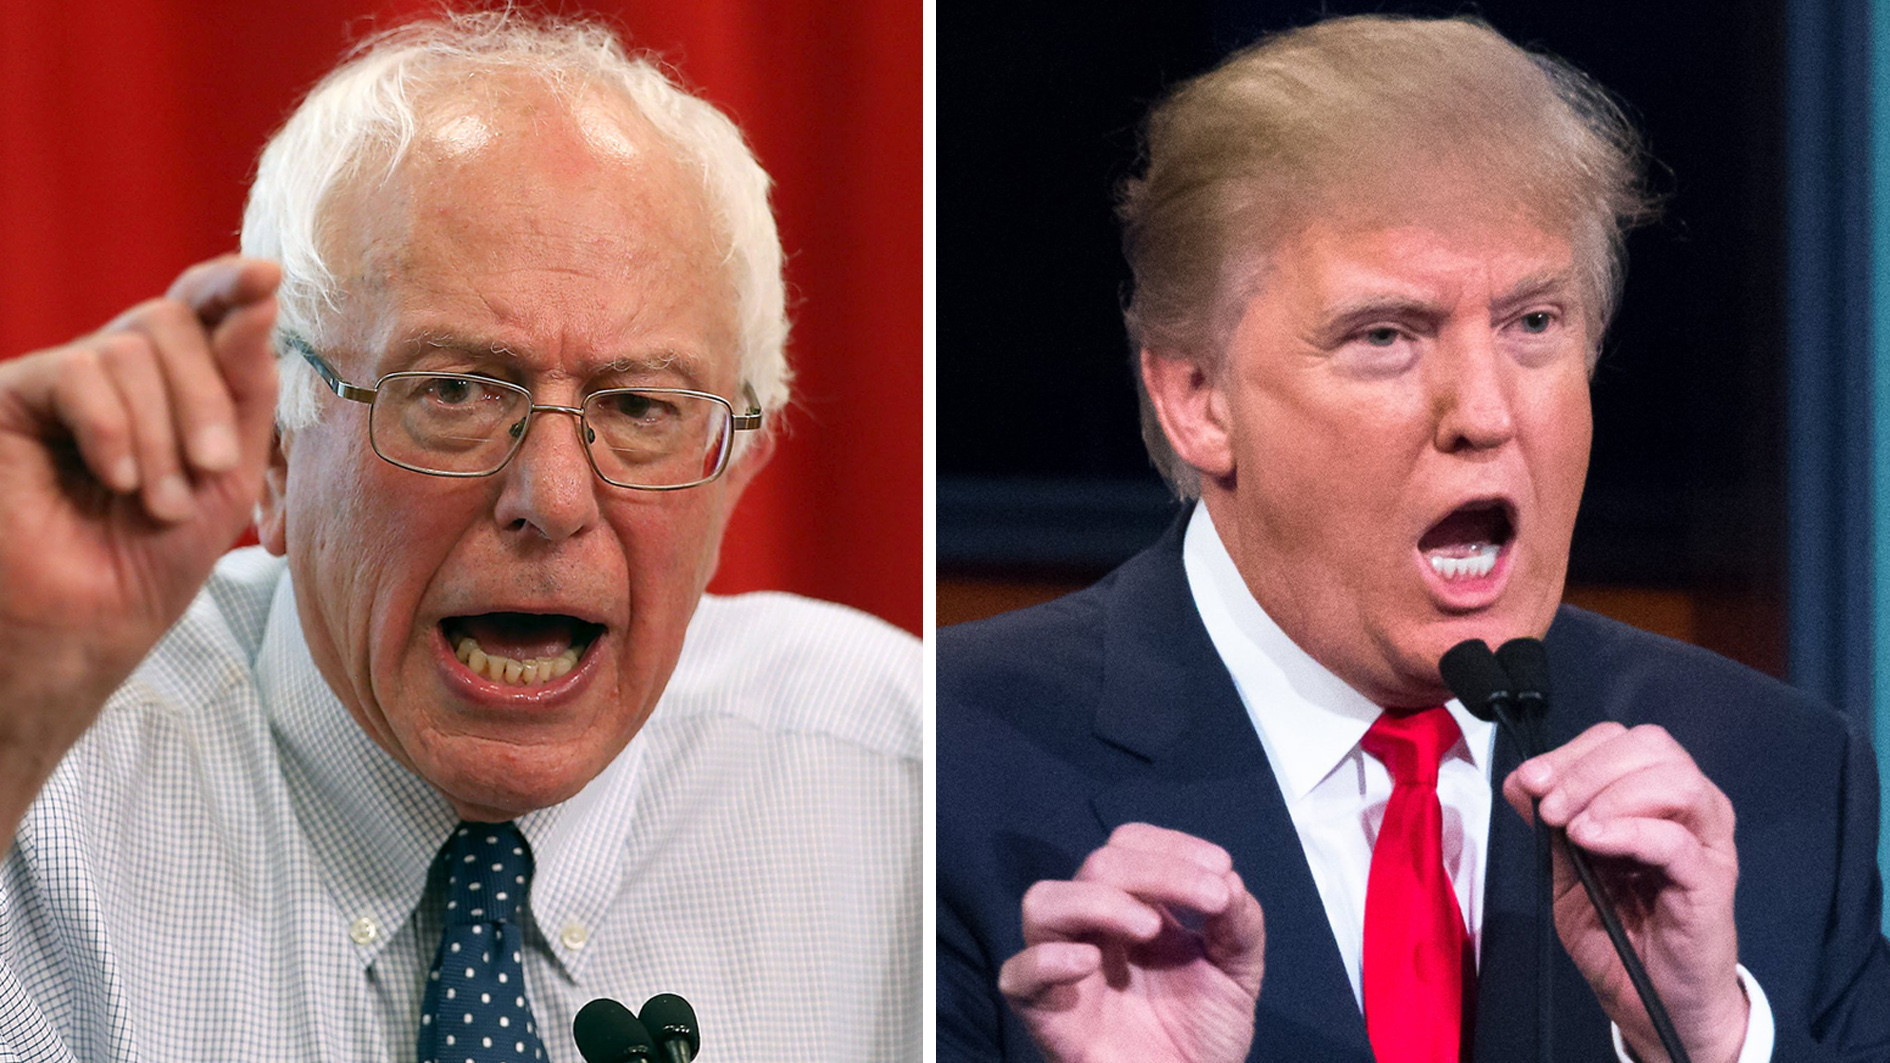 Lessons from Laclau: Are Donald Trump and Bernie Sanders Populists?